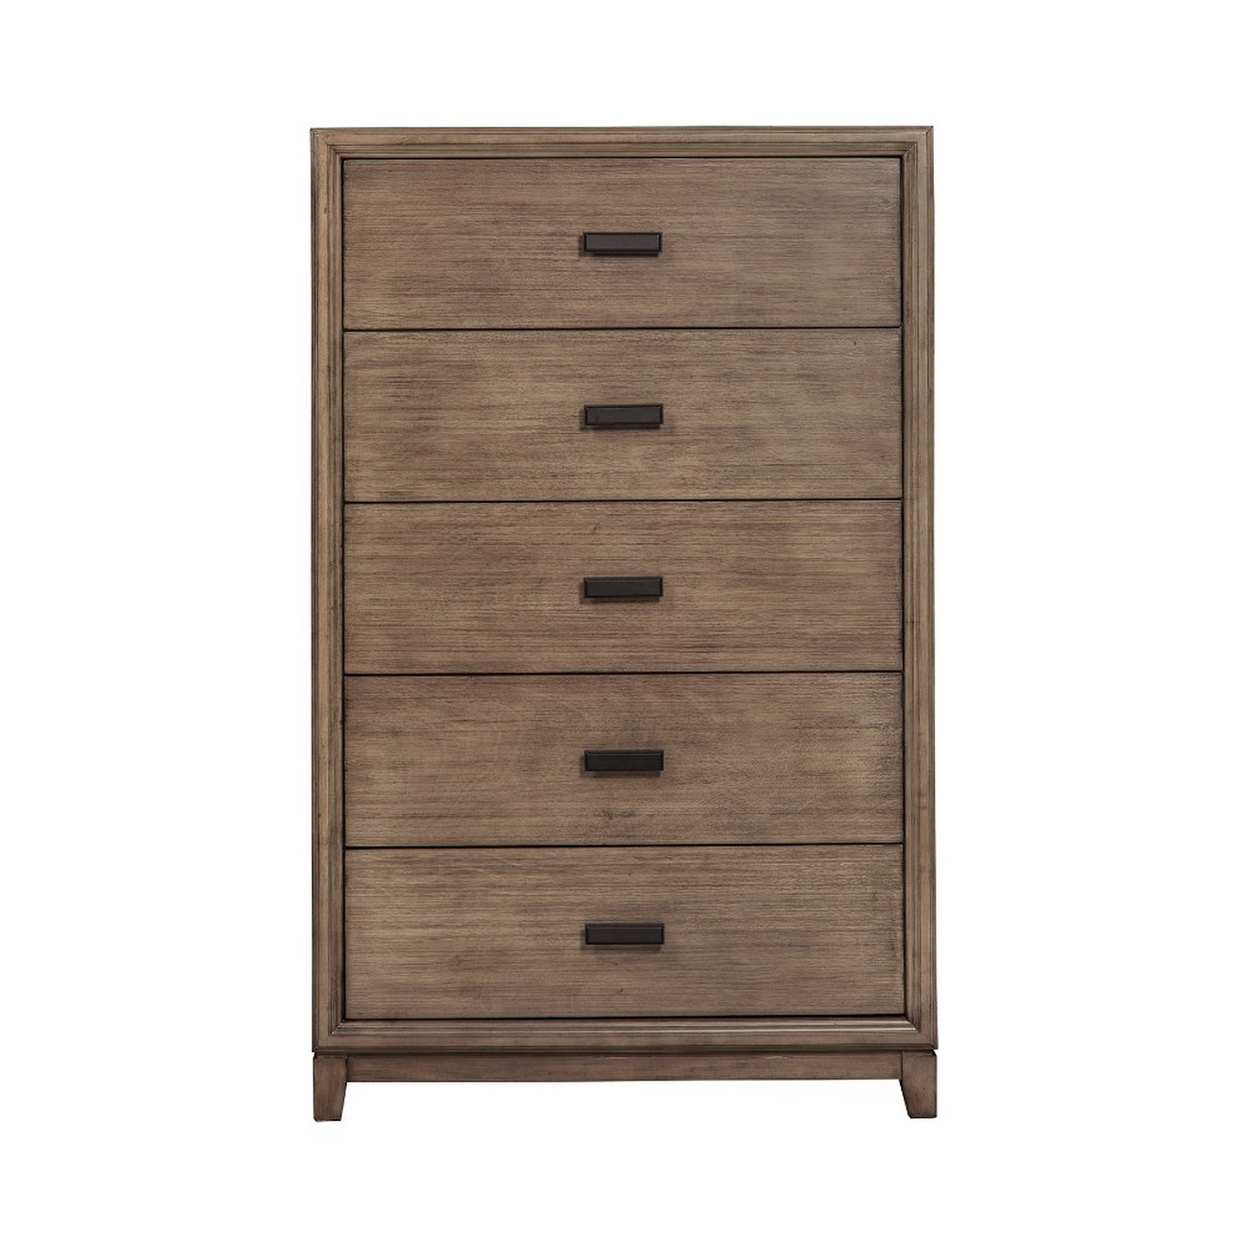 Wooden Chest With 5 Drawers, Brown- Saltoro Sherpi